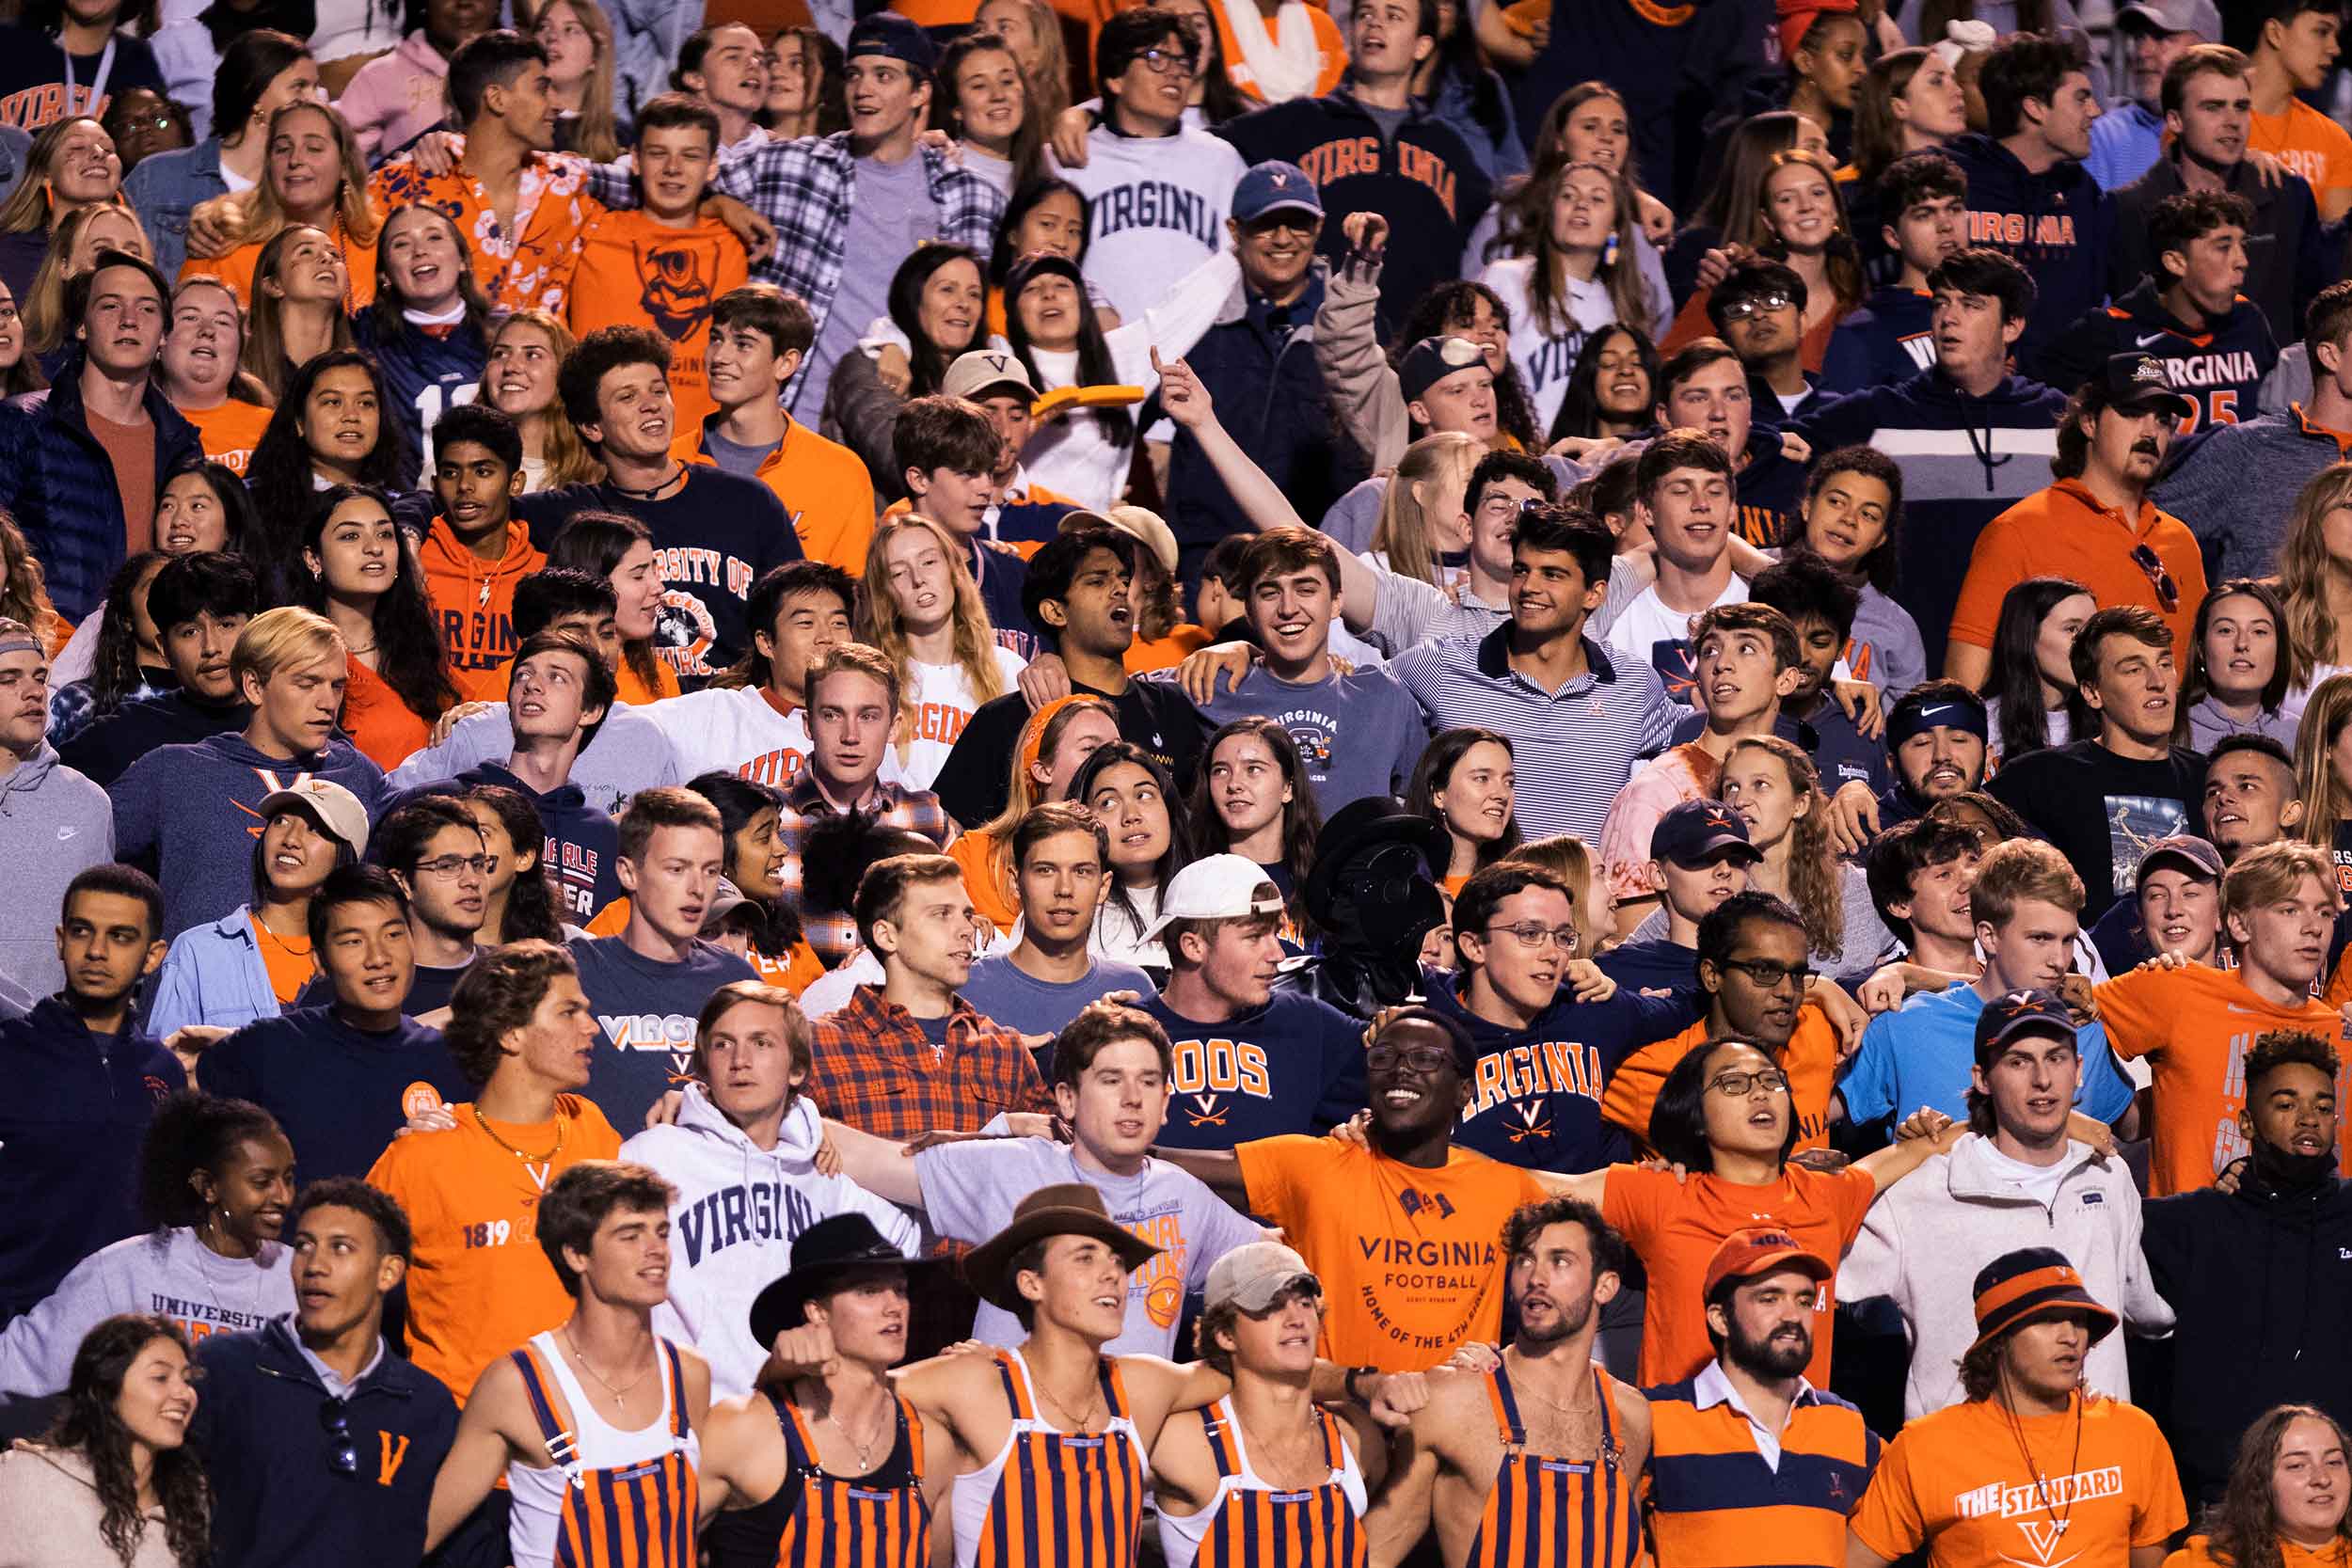 A crowd shot of students in orange and blue at a home football game.